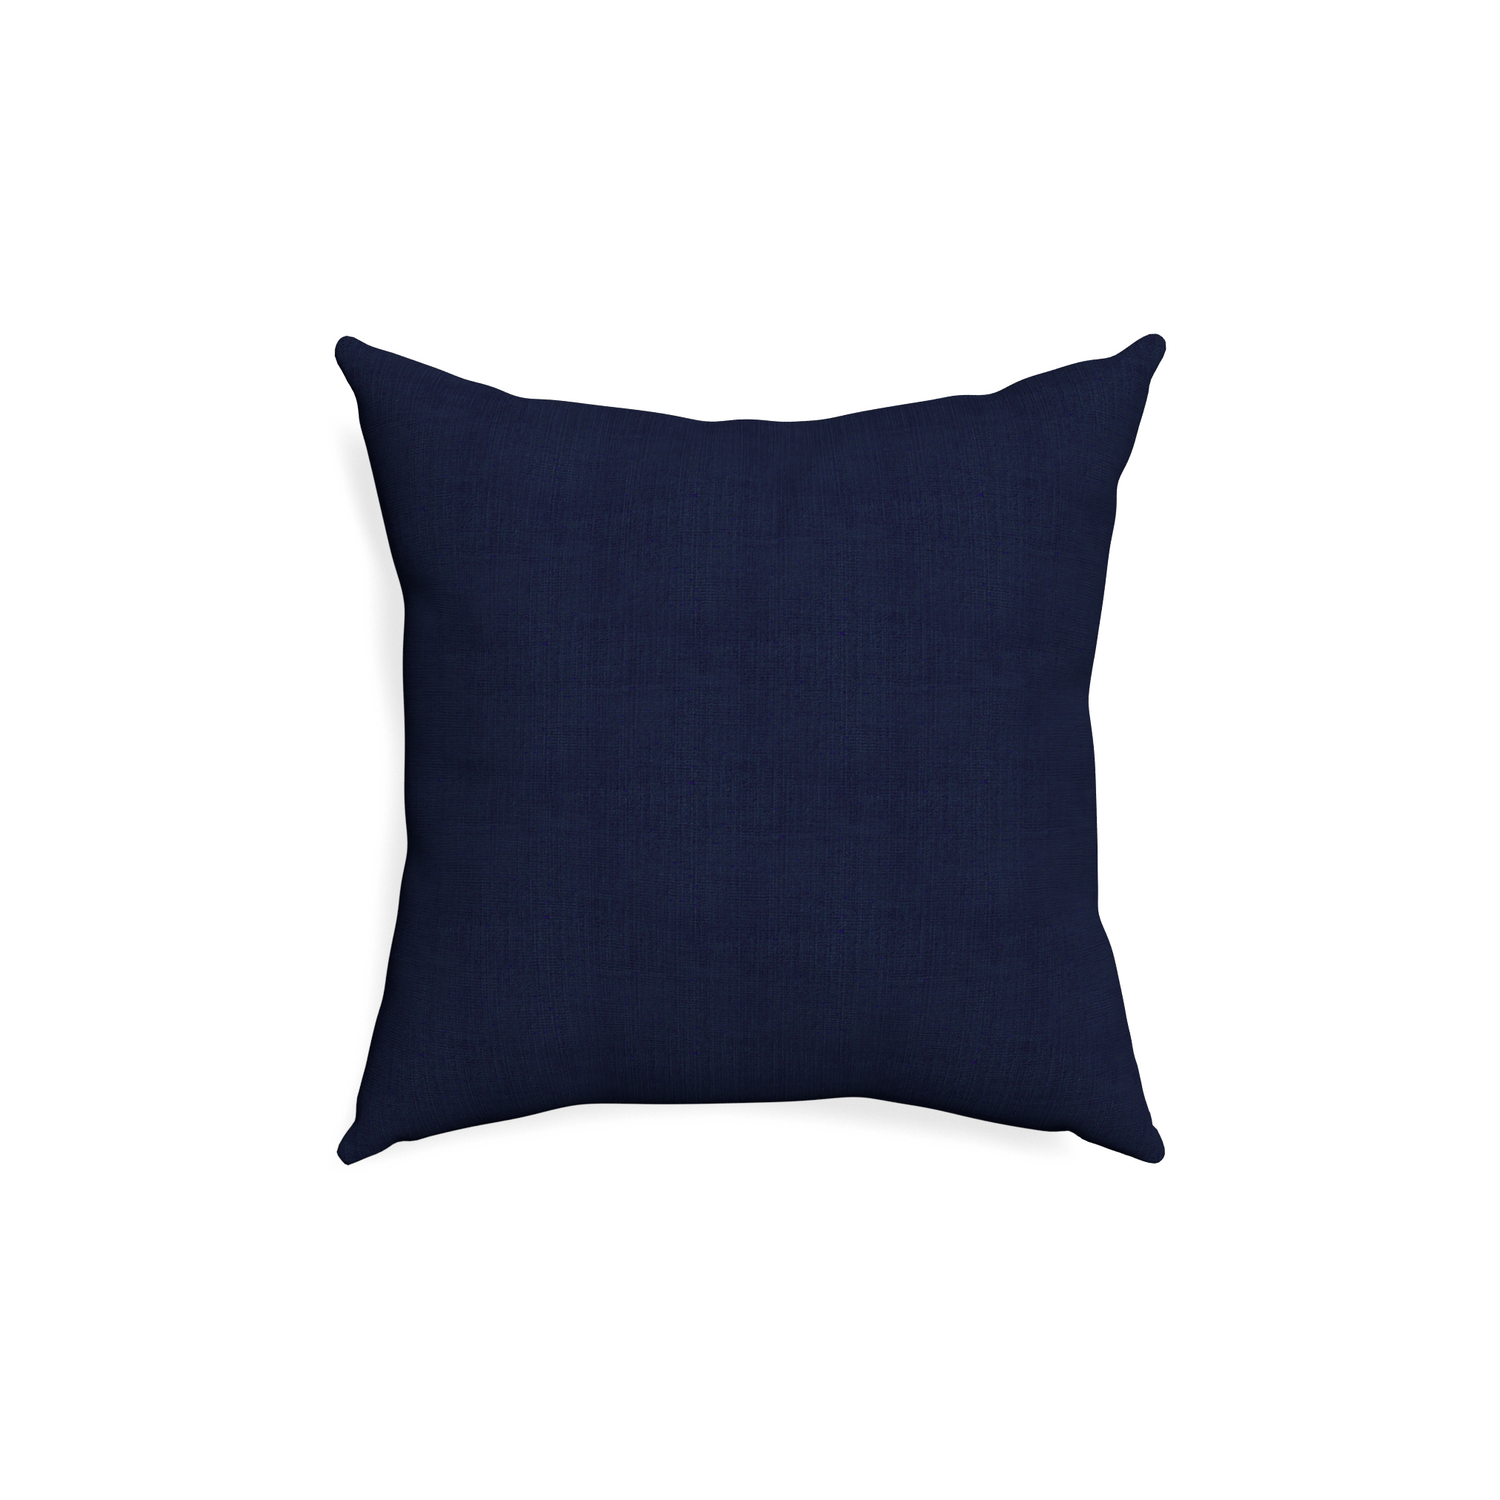 18-square midnight custom navy bluepillow with none on white background